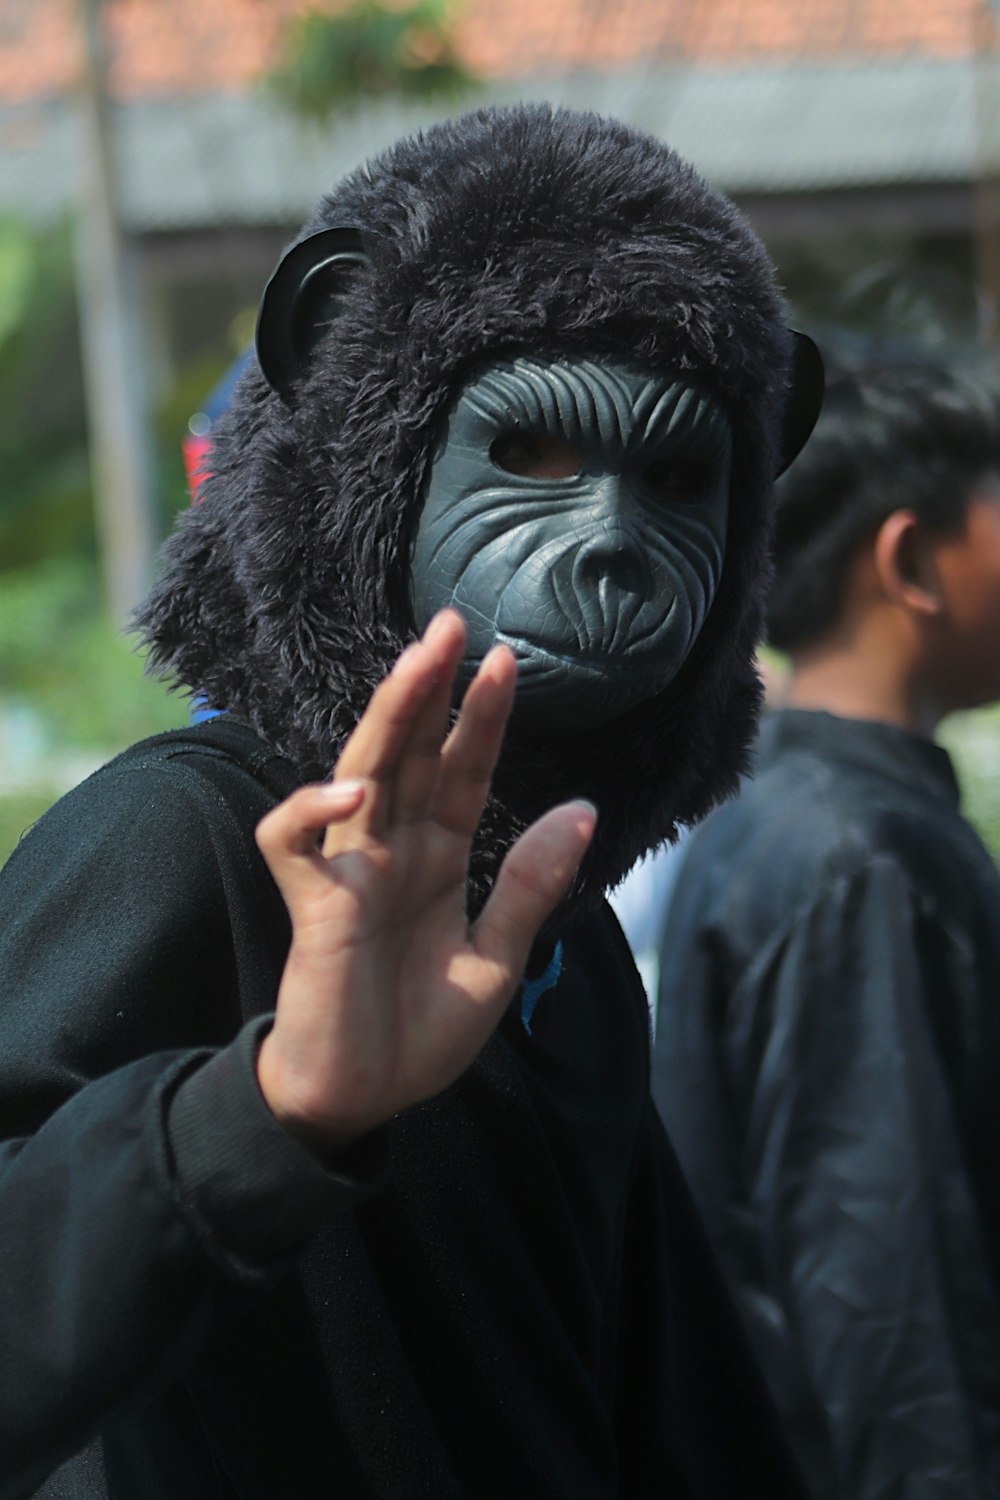 a person wearing a gorilla mask and making a hand gesture